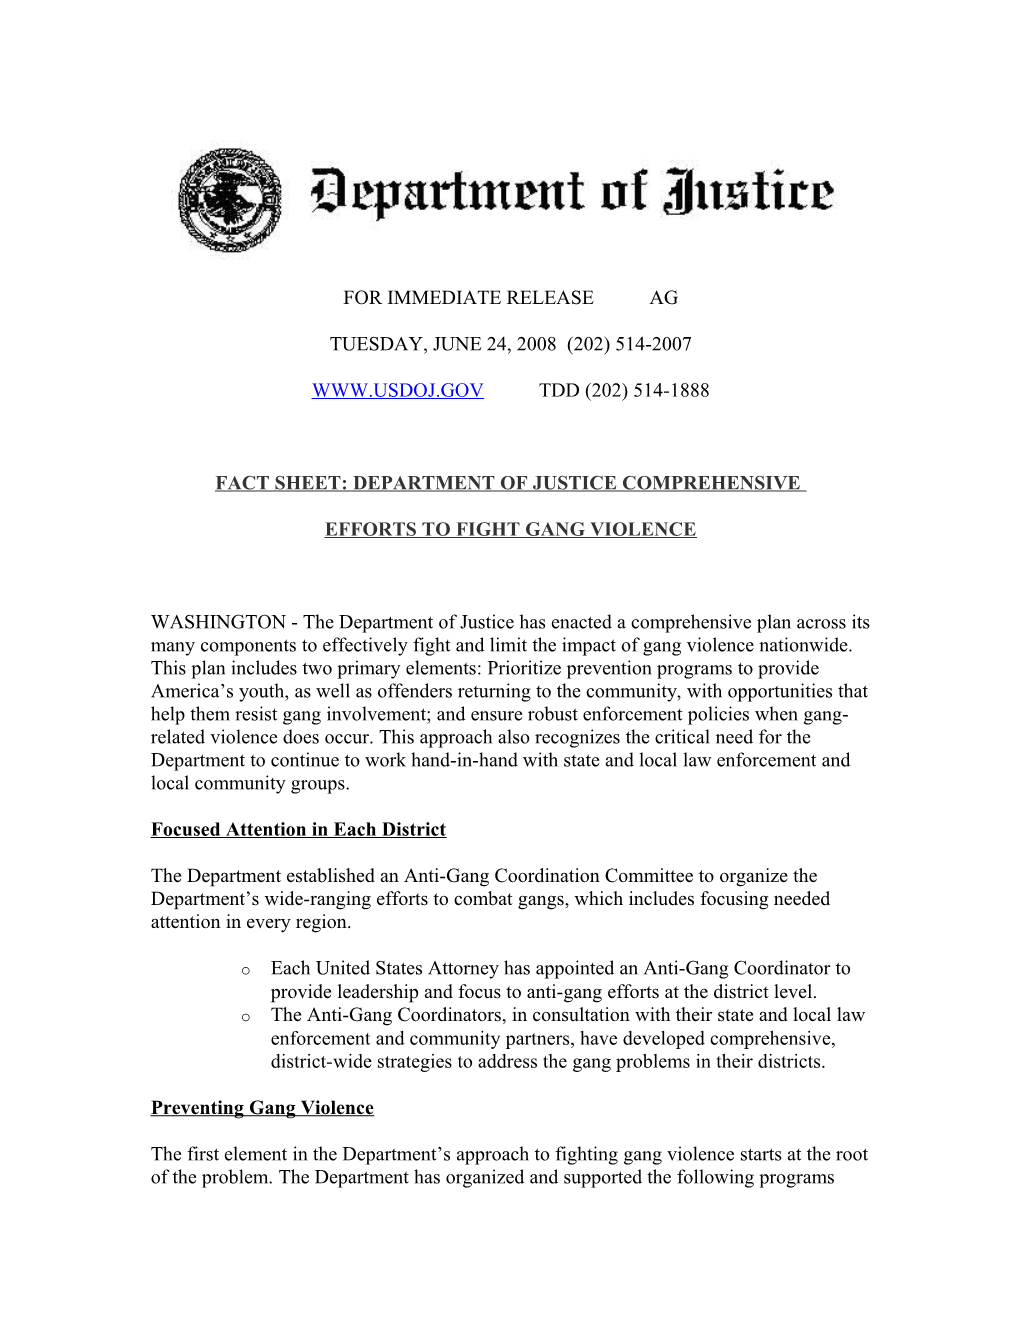 Fact Sheet: Department of Justice Comprehensive s1